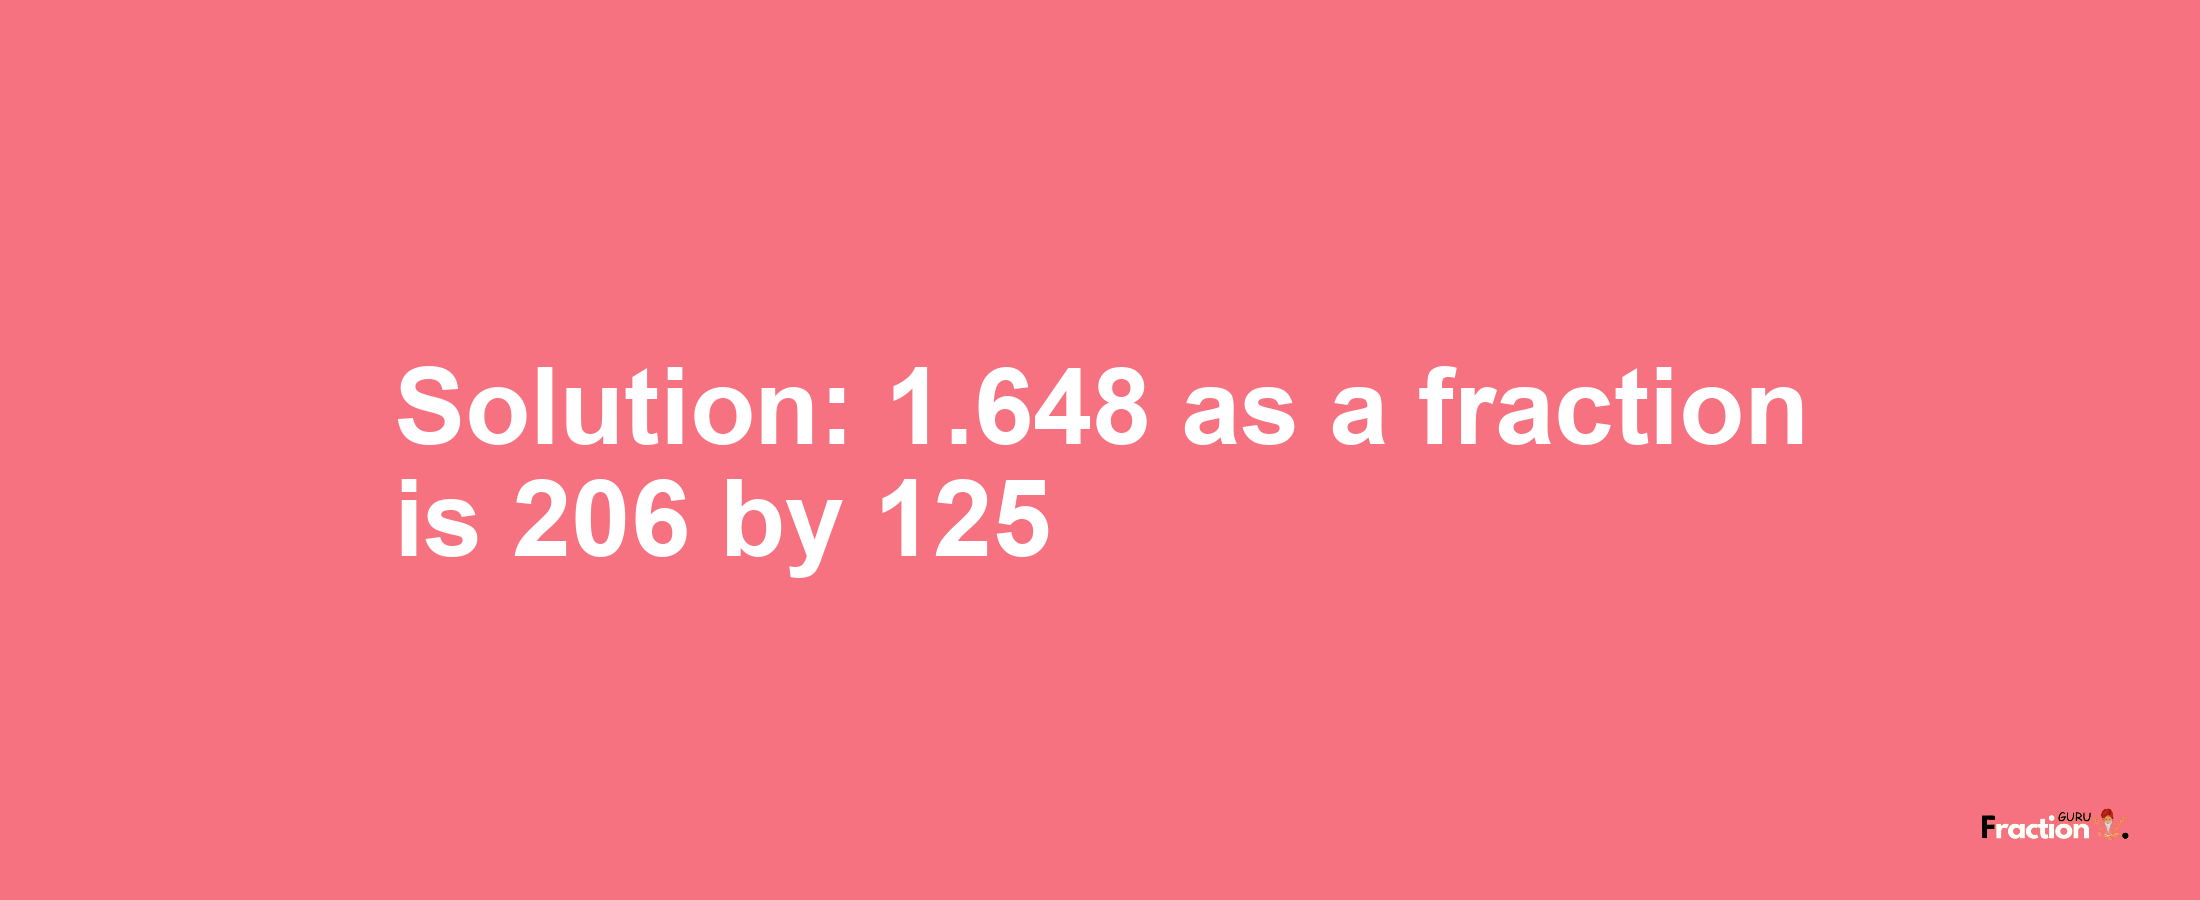 Solution:1.648 as a fraction is 206/125